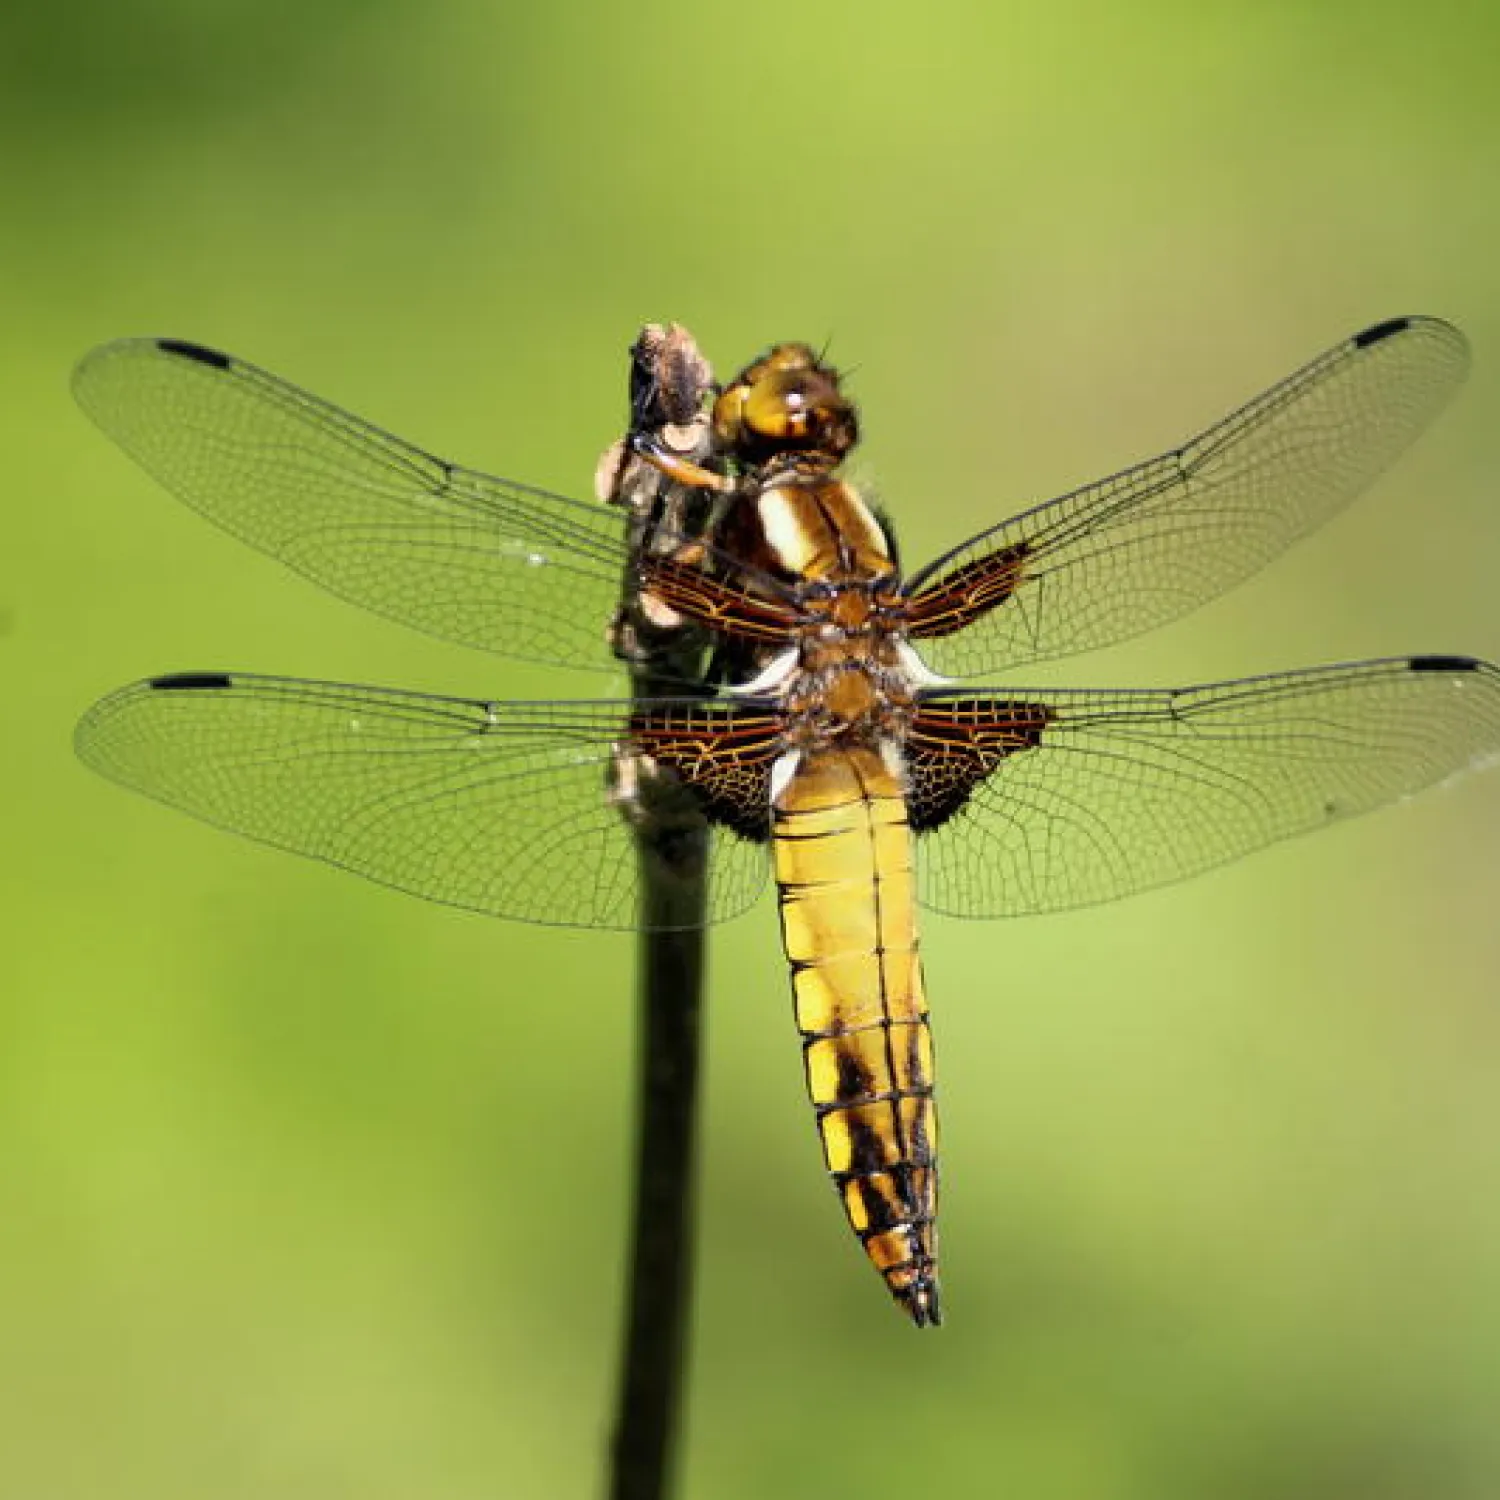 A female Broad-Bodied Chaser Dragonfly in the spring sunshine